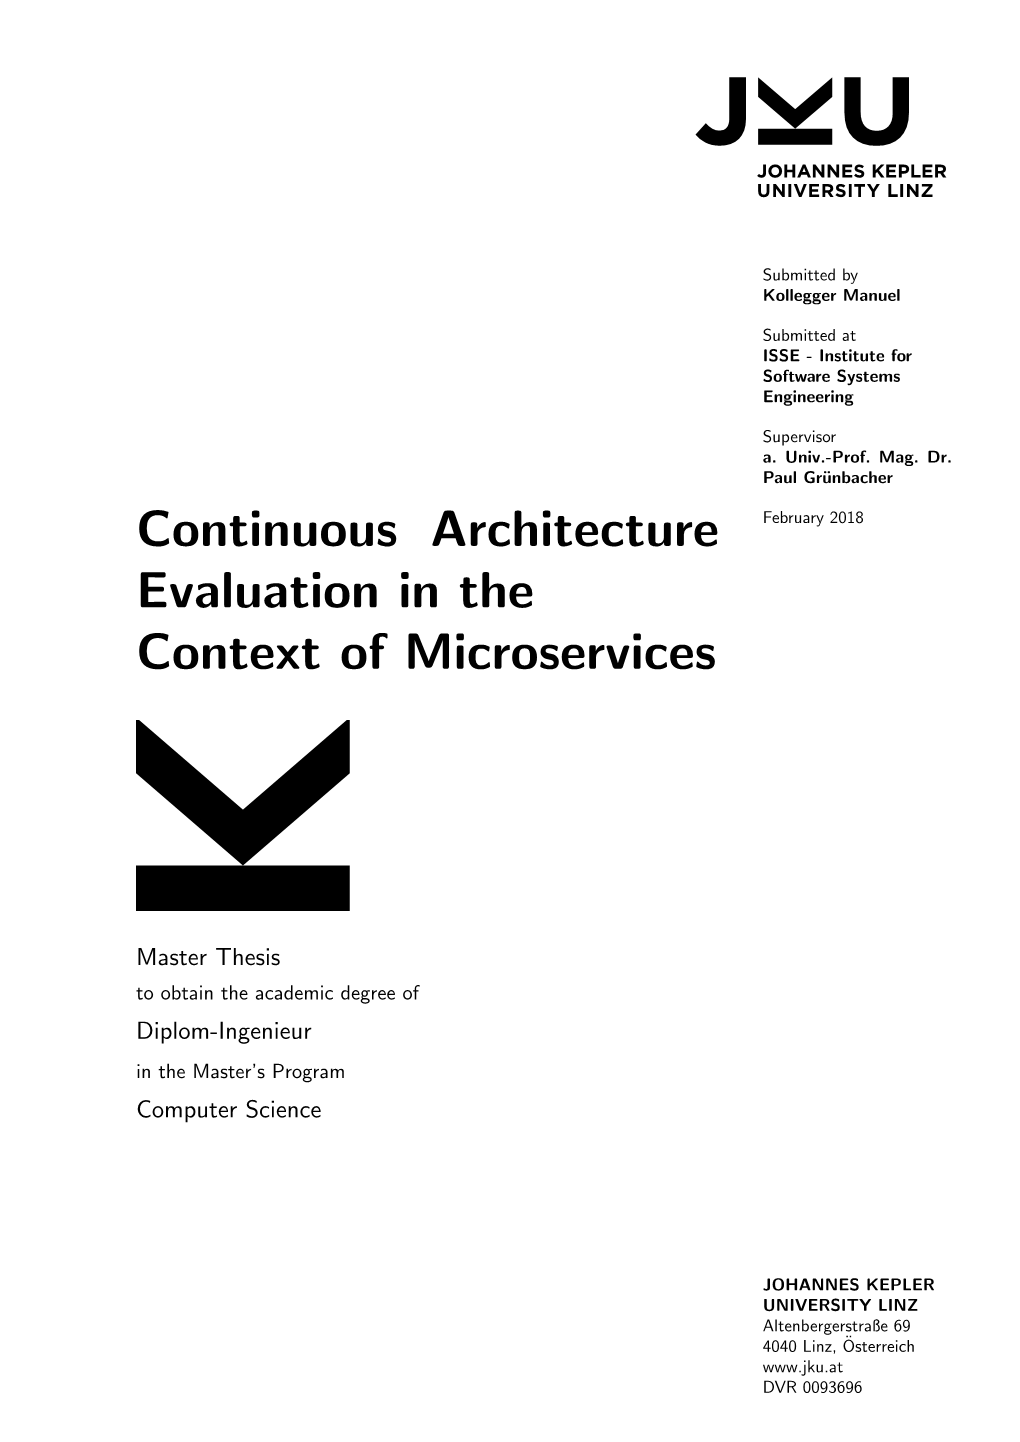 Continuous Architecture Evaluation in the Context of Microservices